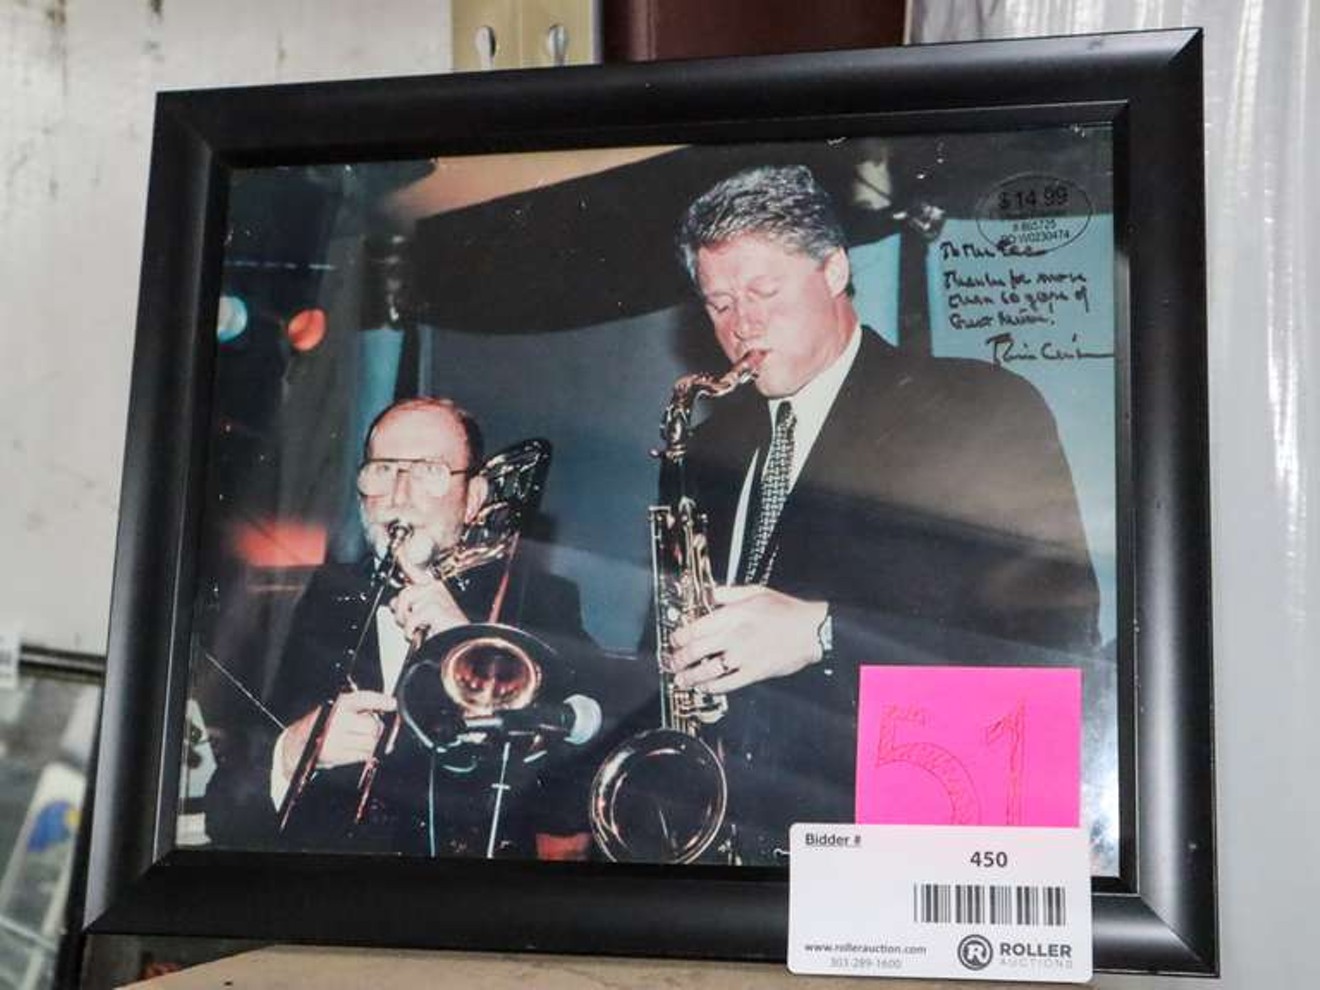 A signed and framed photo of former president Bill Clinton that used to hang in El Chapultepec is up for auction.